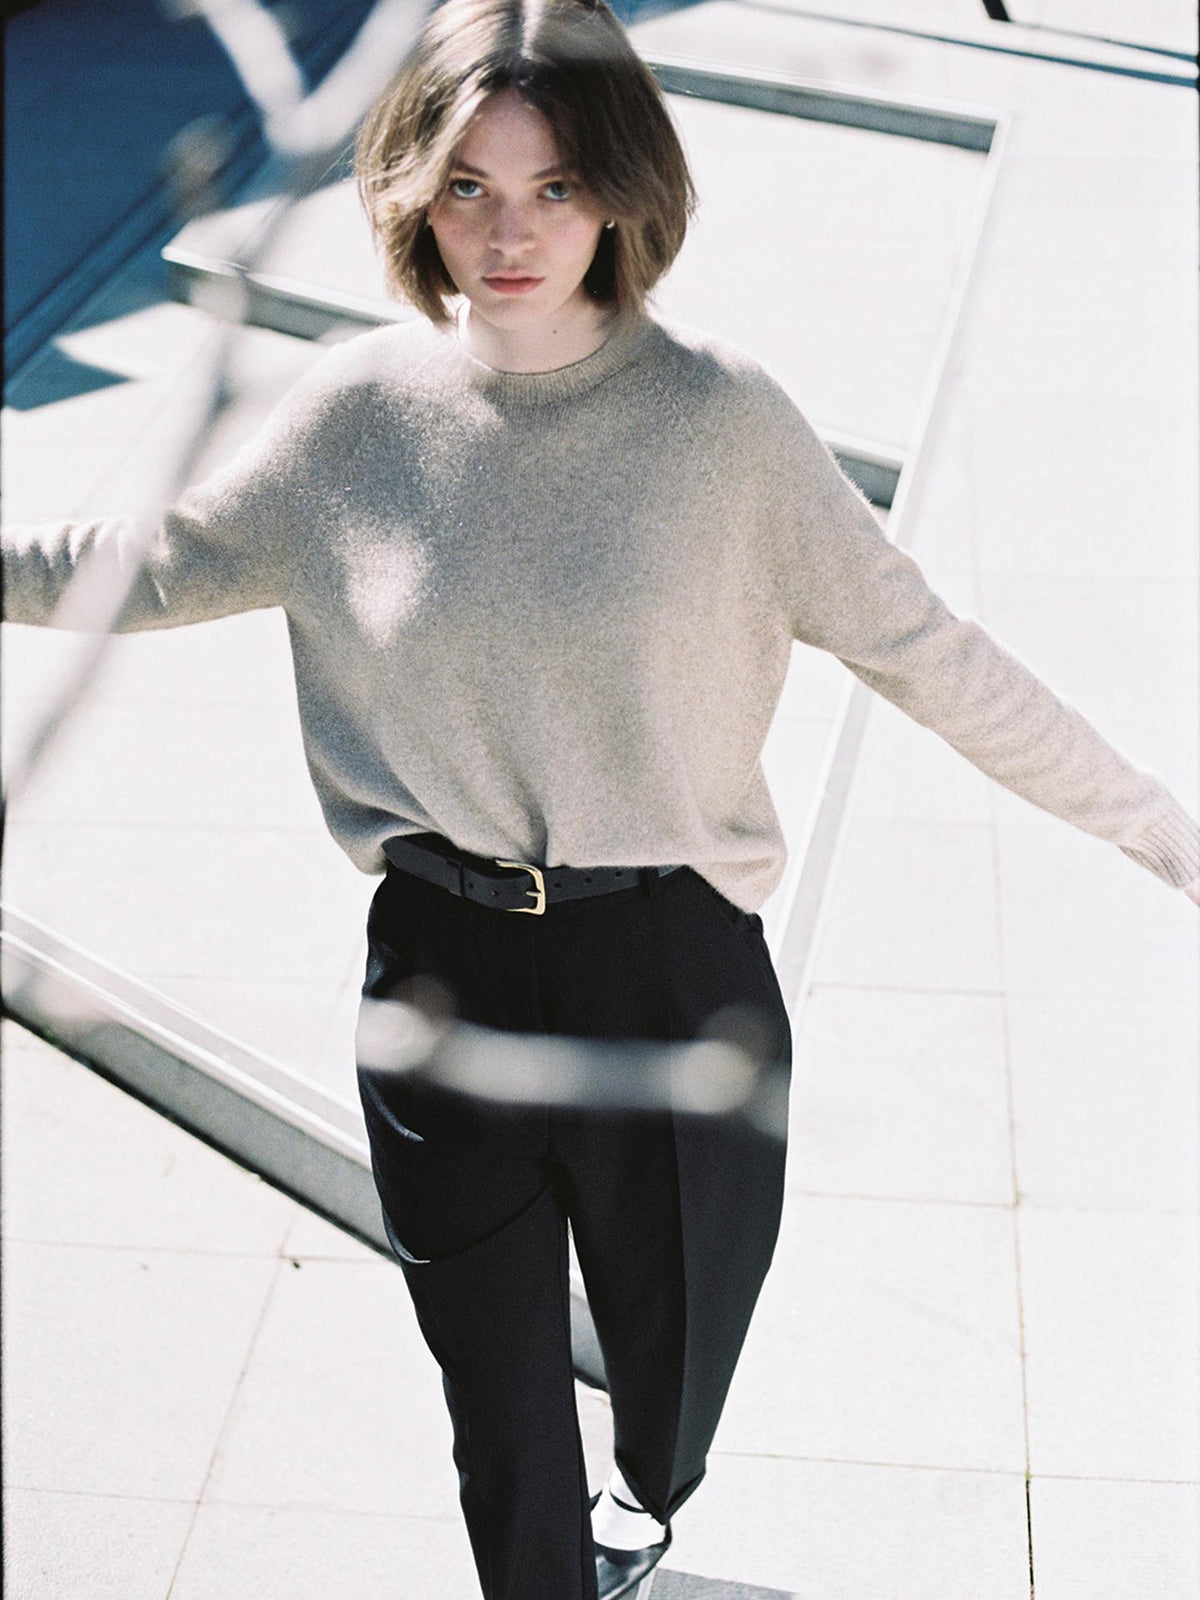 A young woman in a relaxed fit Nimbus Raglan Knit – Natural sweater from Francie and black trousers stands on a sunlit staircase, her hands extended slightly to her sides.